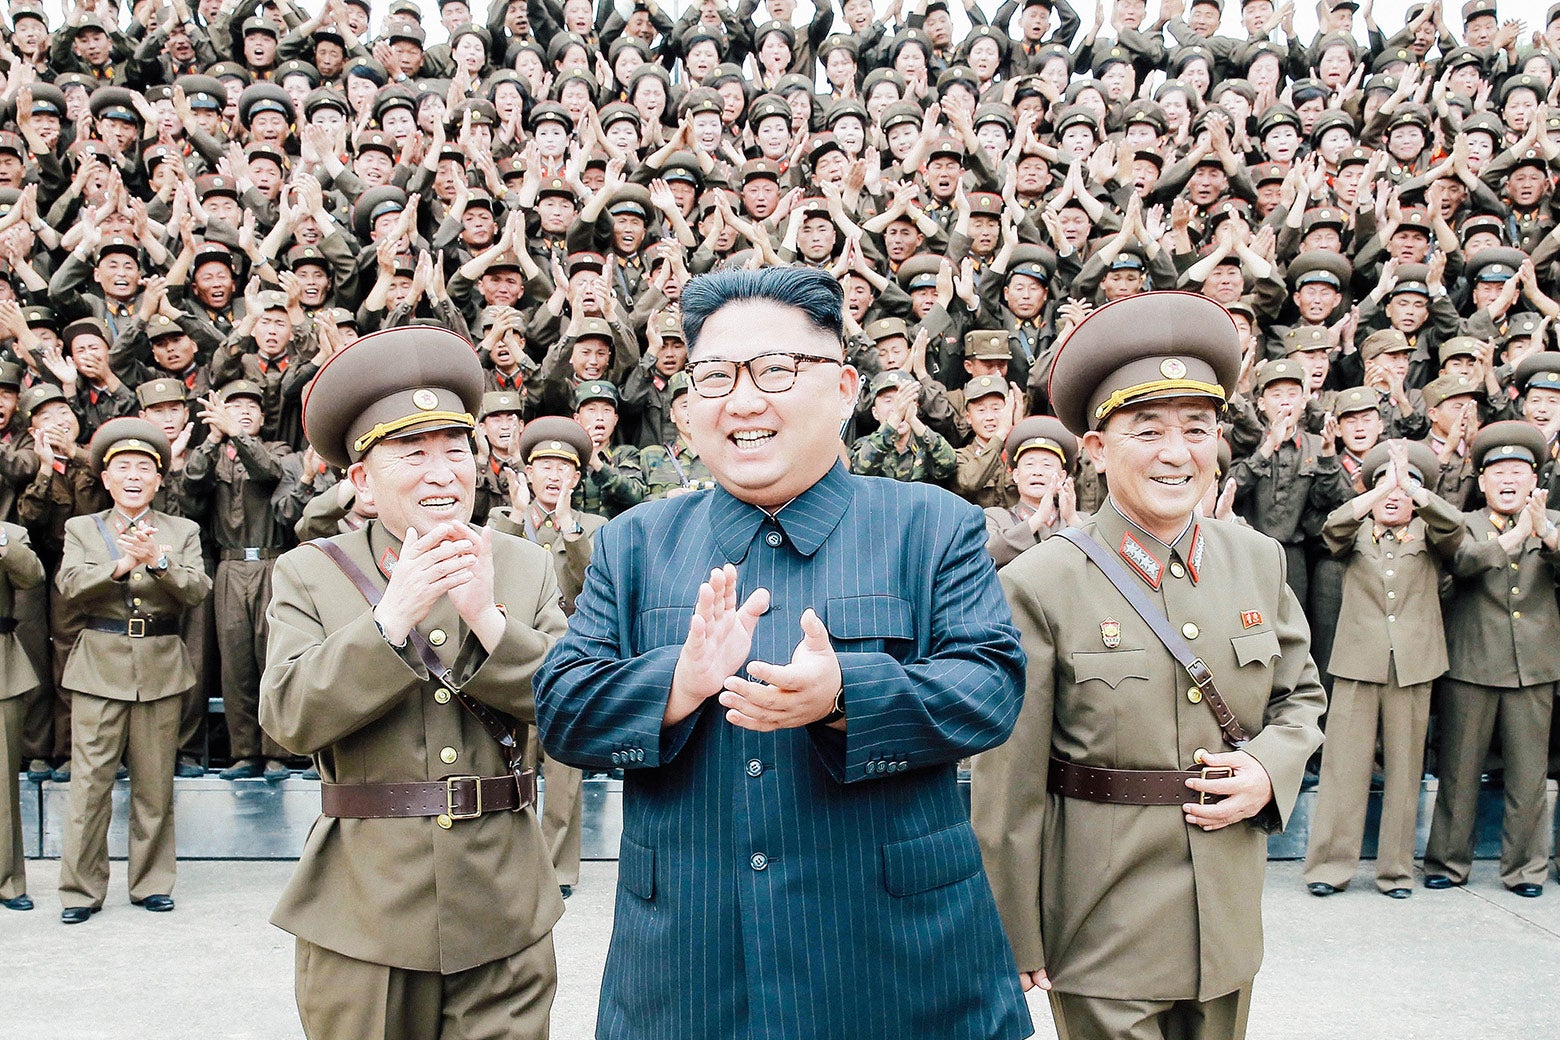 North Korean leader Kim Jong-un claps with military officers at the Strategic Force Command of the Korean People’s Army in an unknown location in North Korea in this undated photo released by the Korean Central News Agency on August 15.